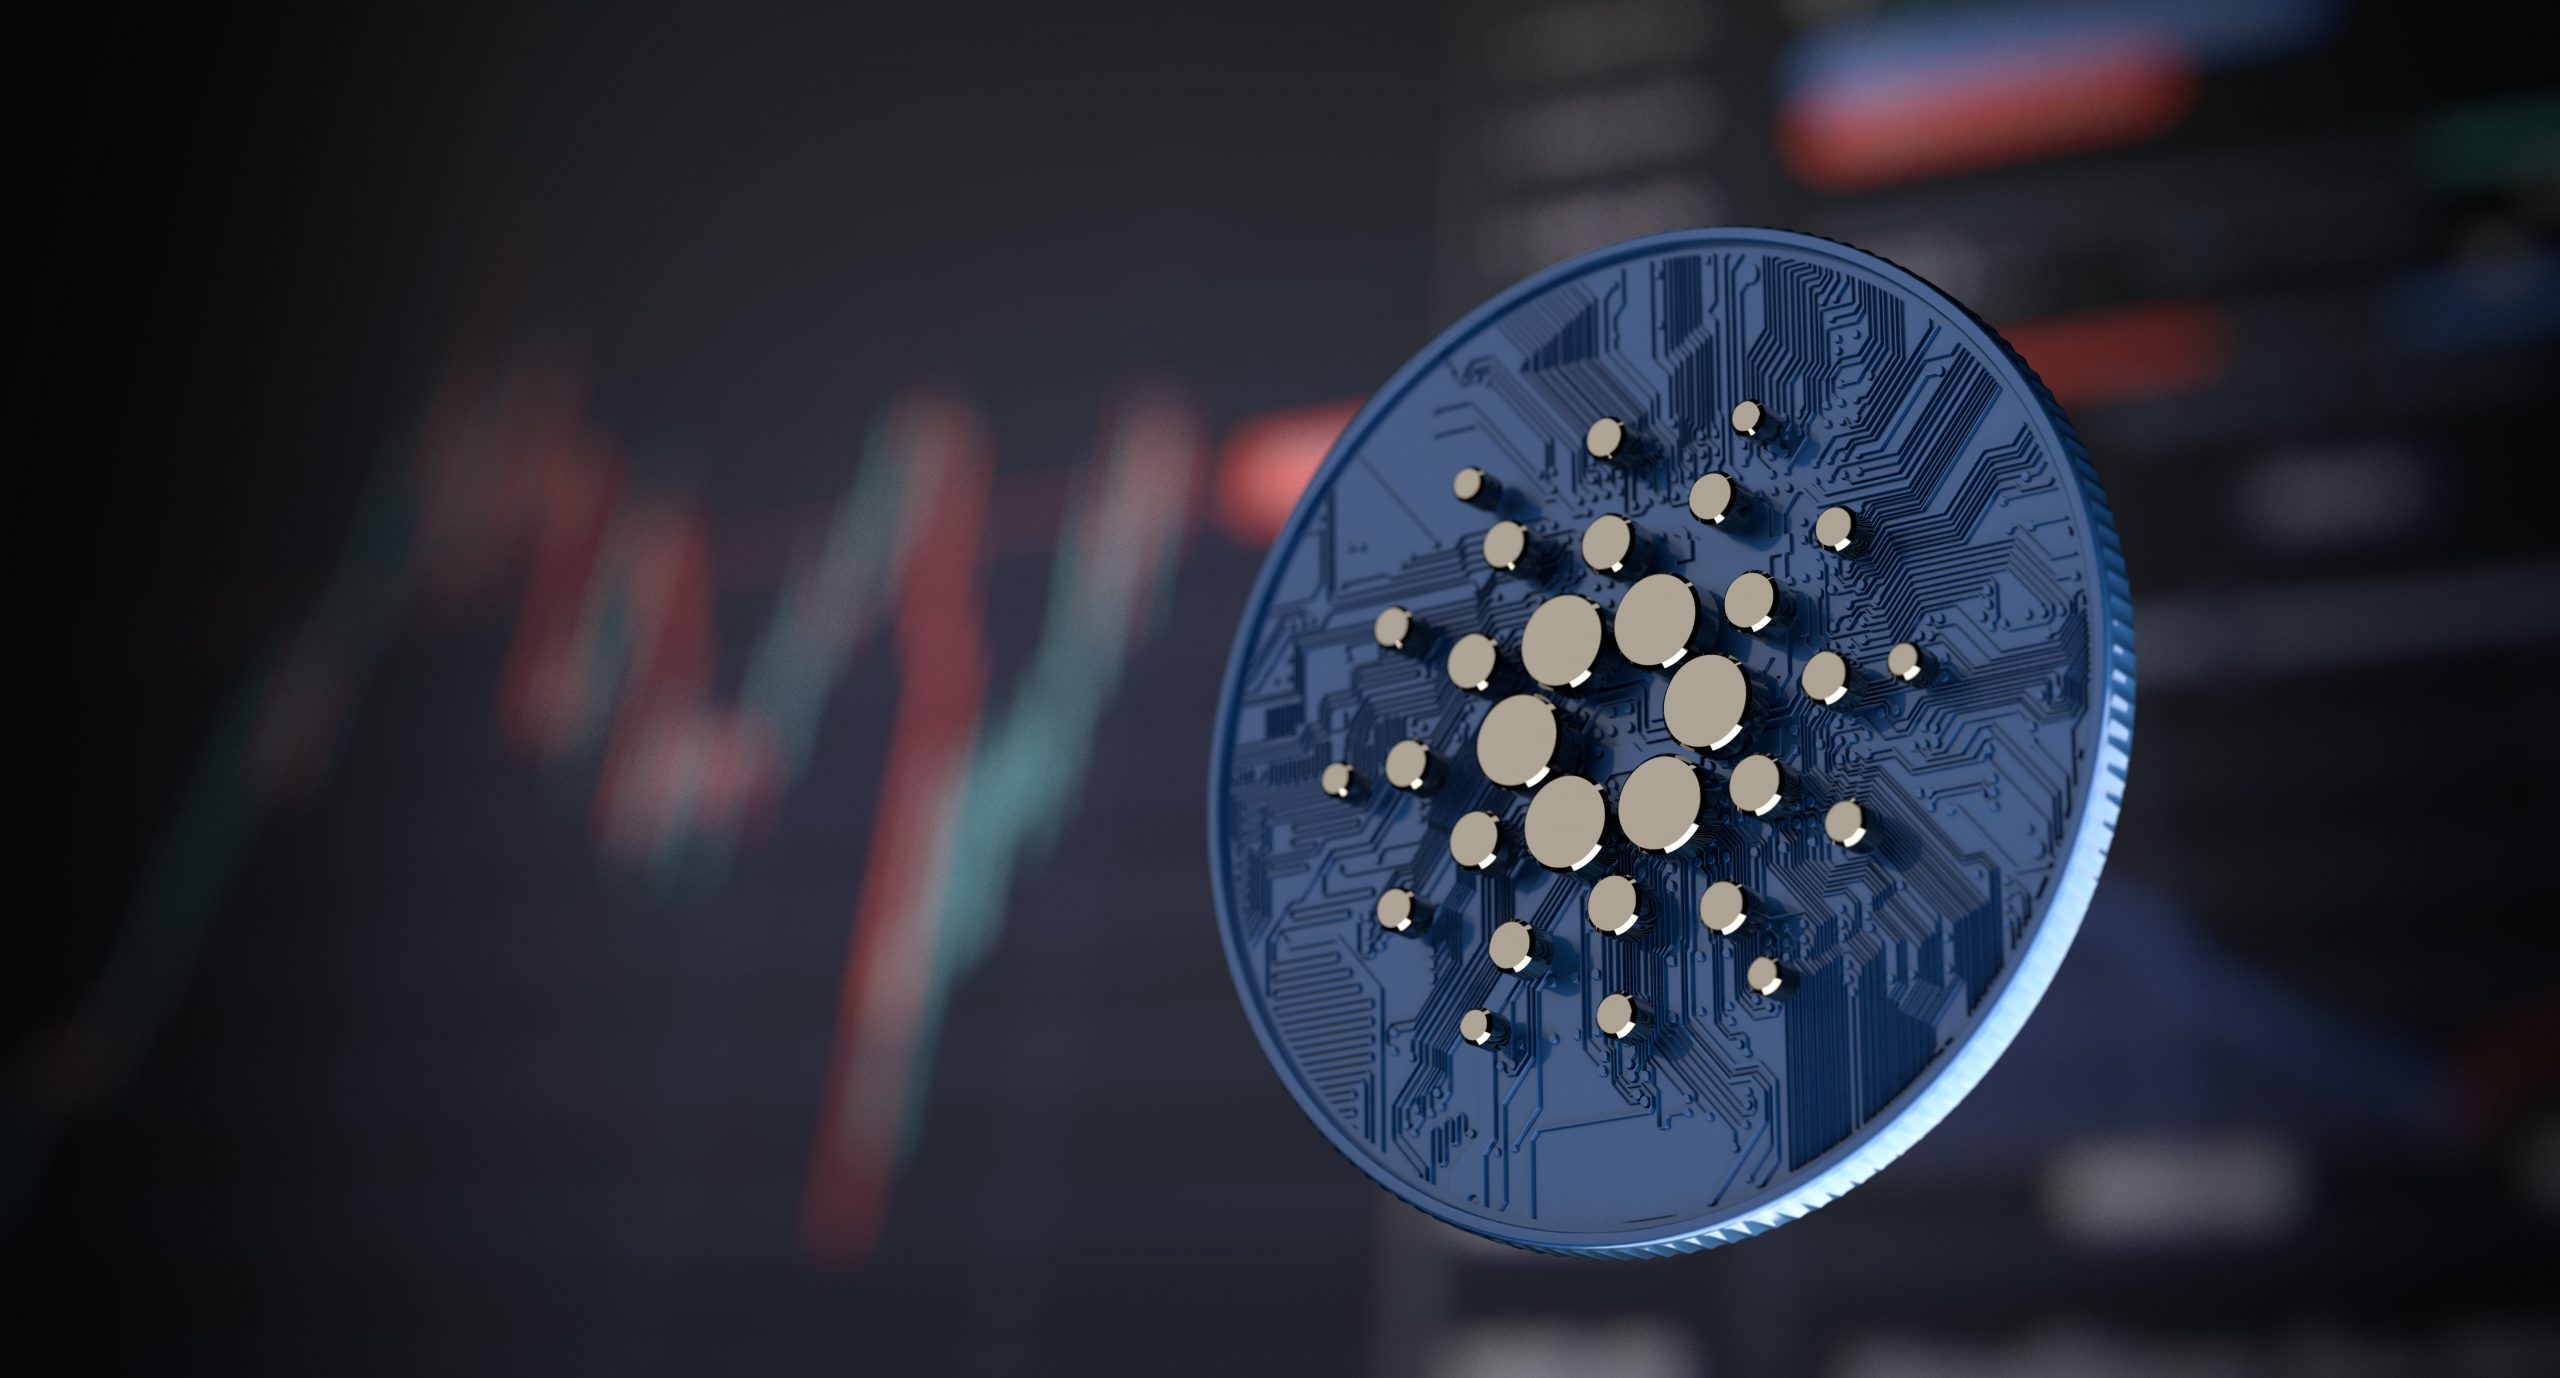 Cardano Could Hit $7 by 2030, According to Changelly